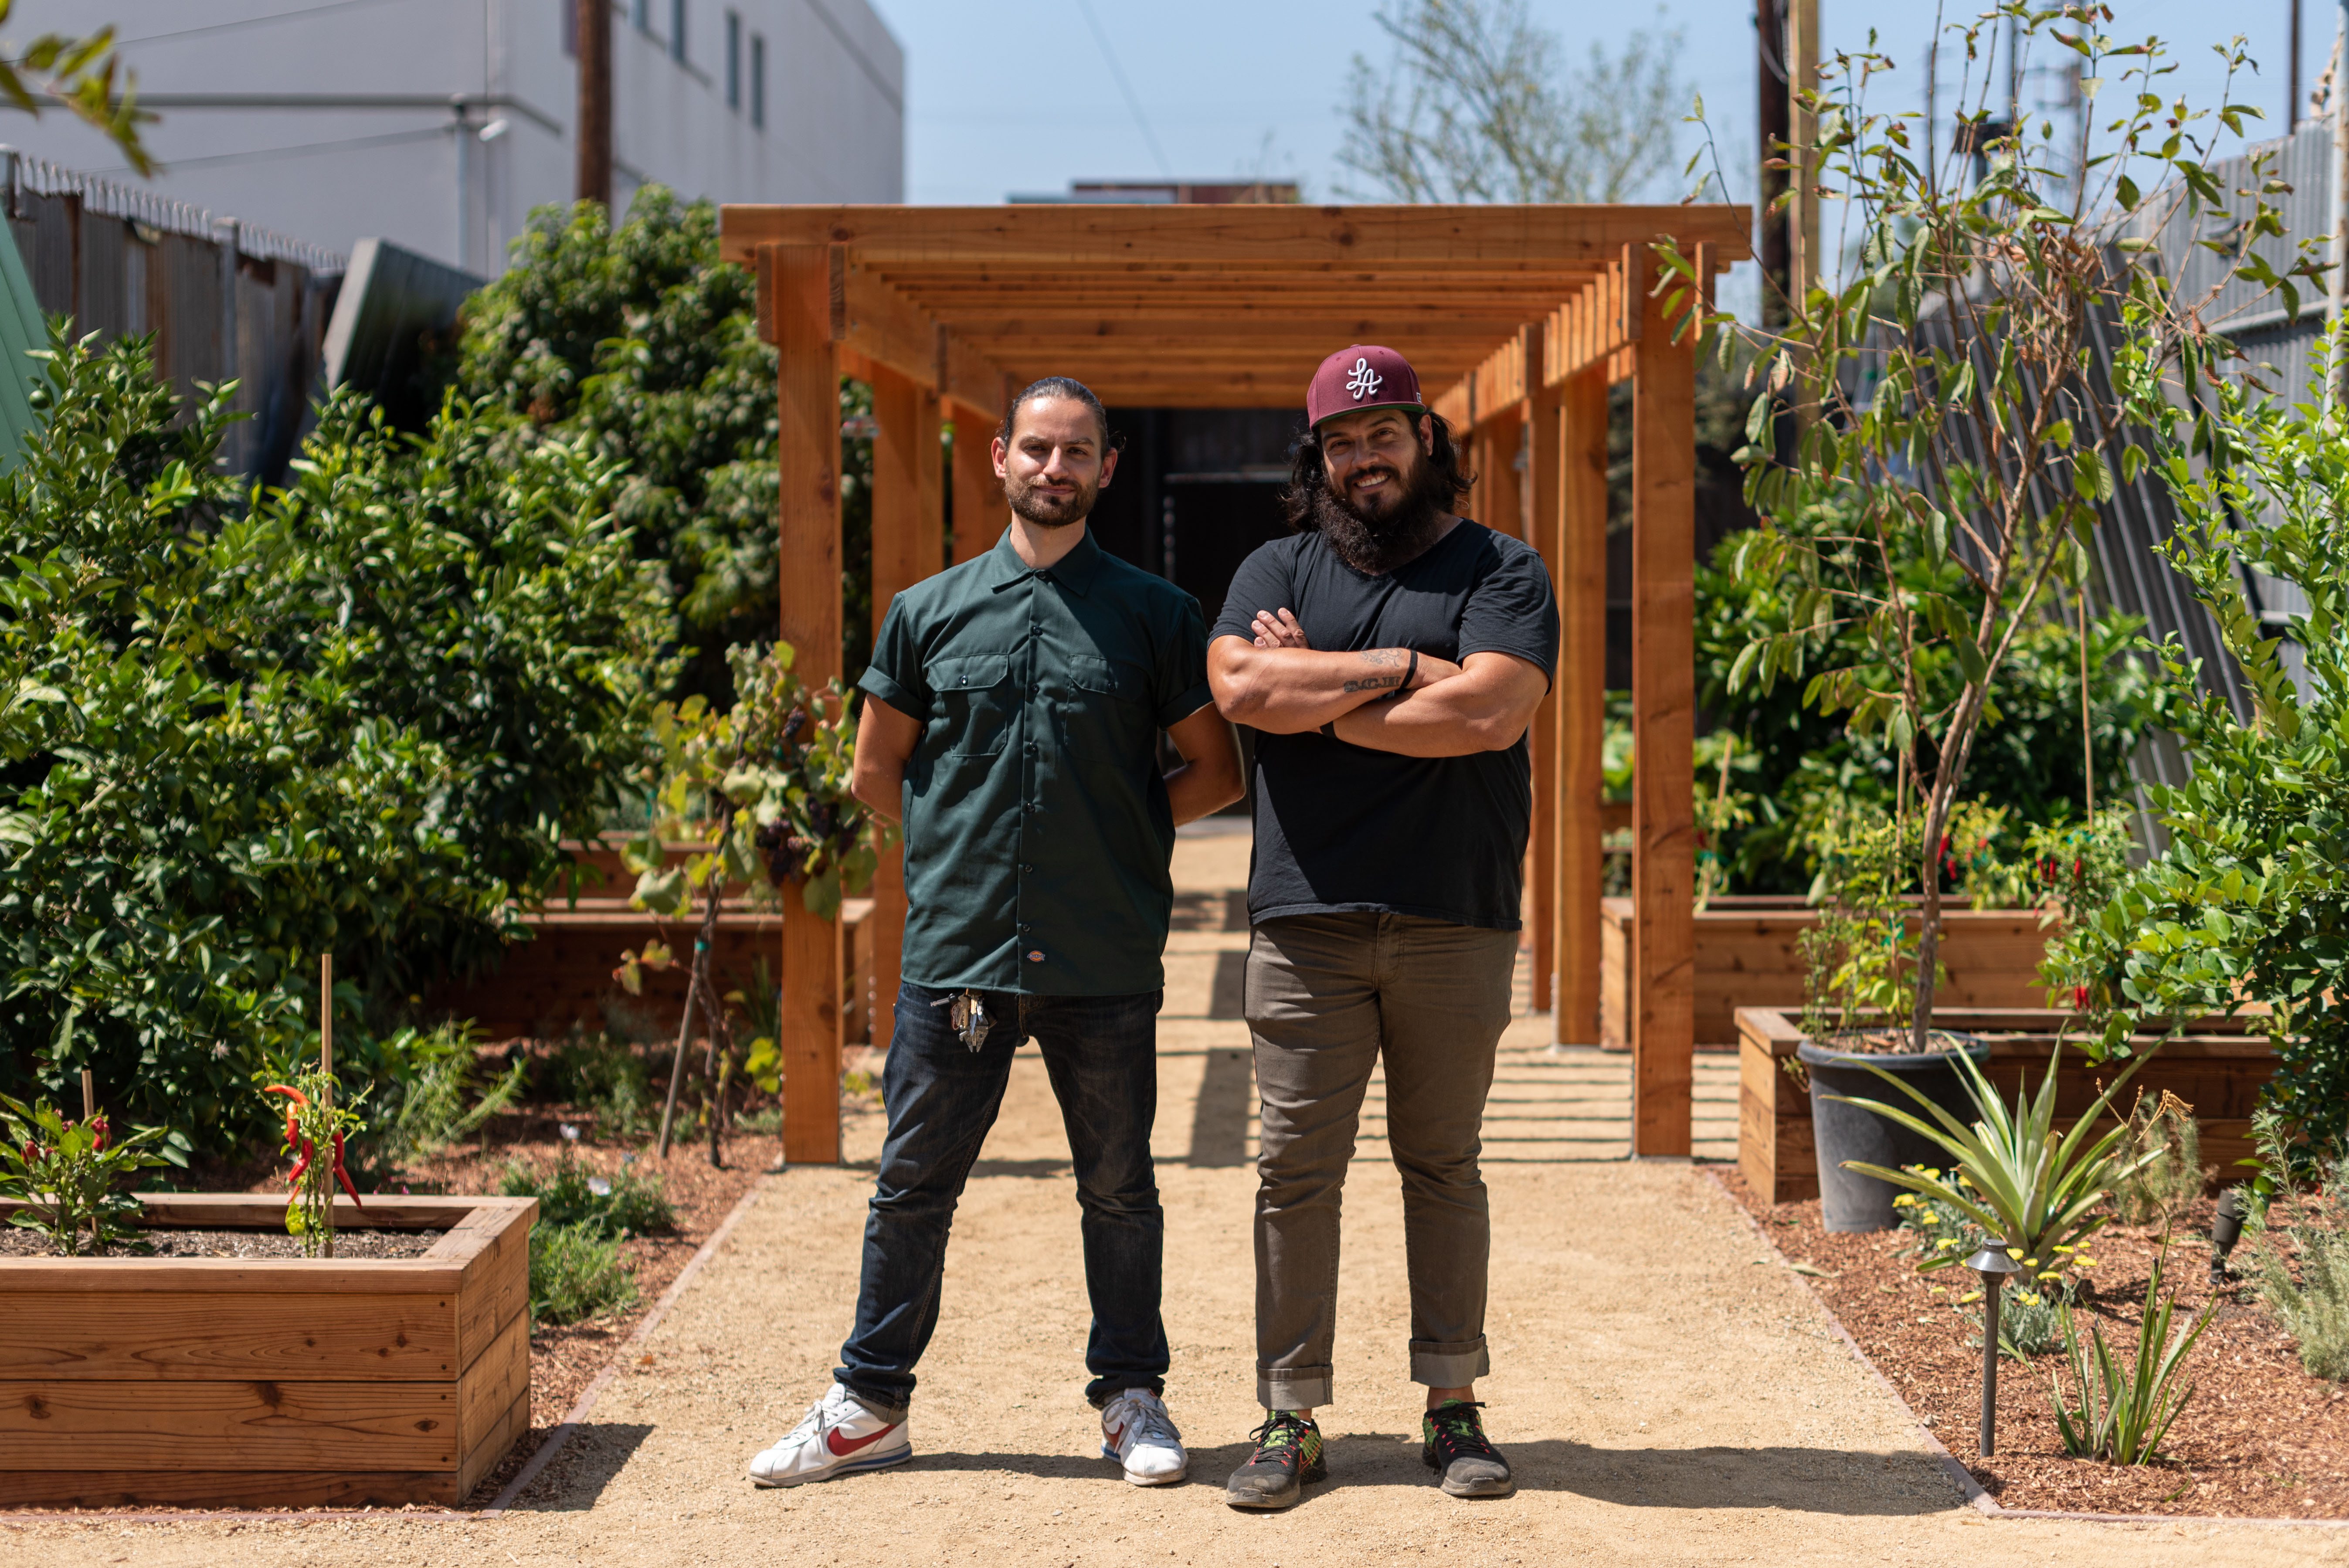 Two men stand in a sunny garden looking directly at camera.